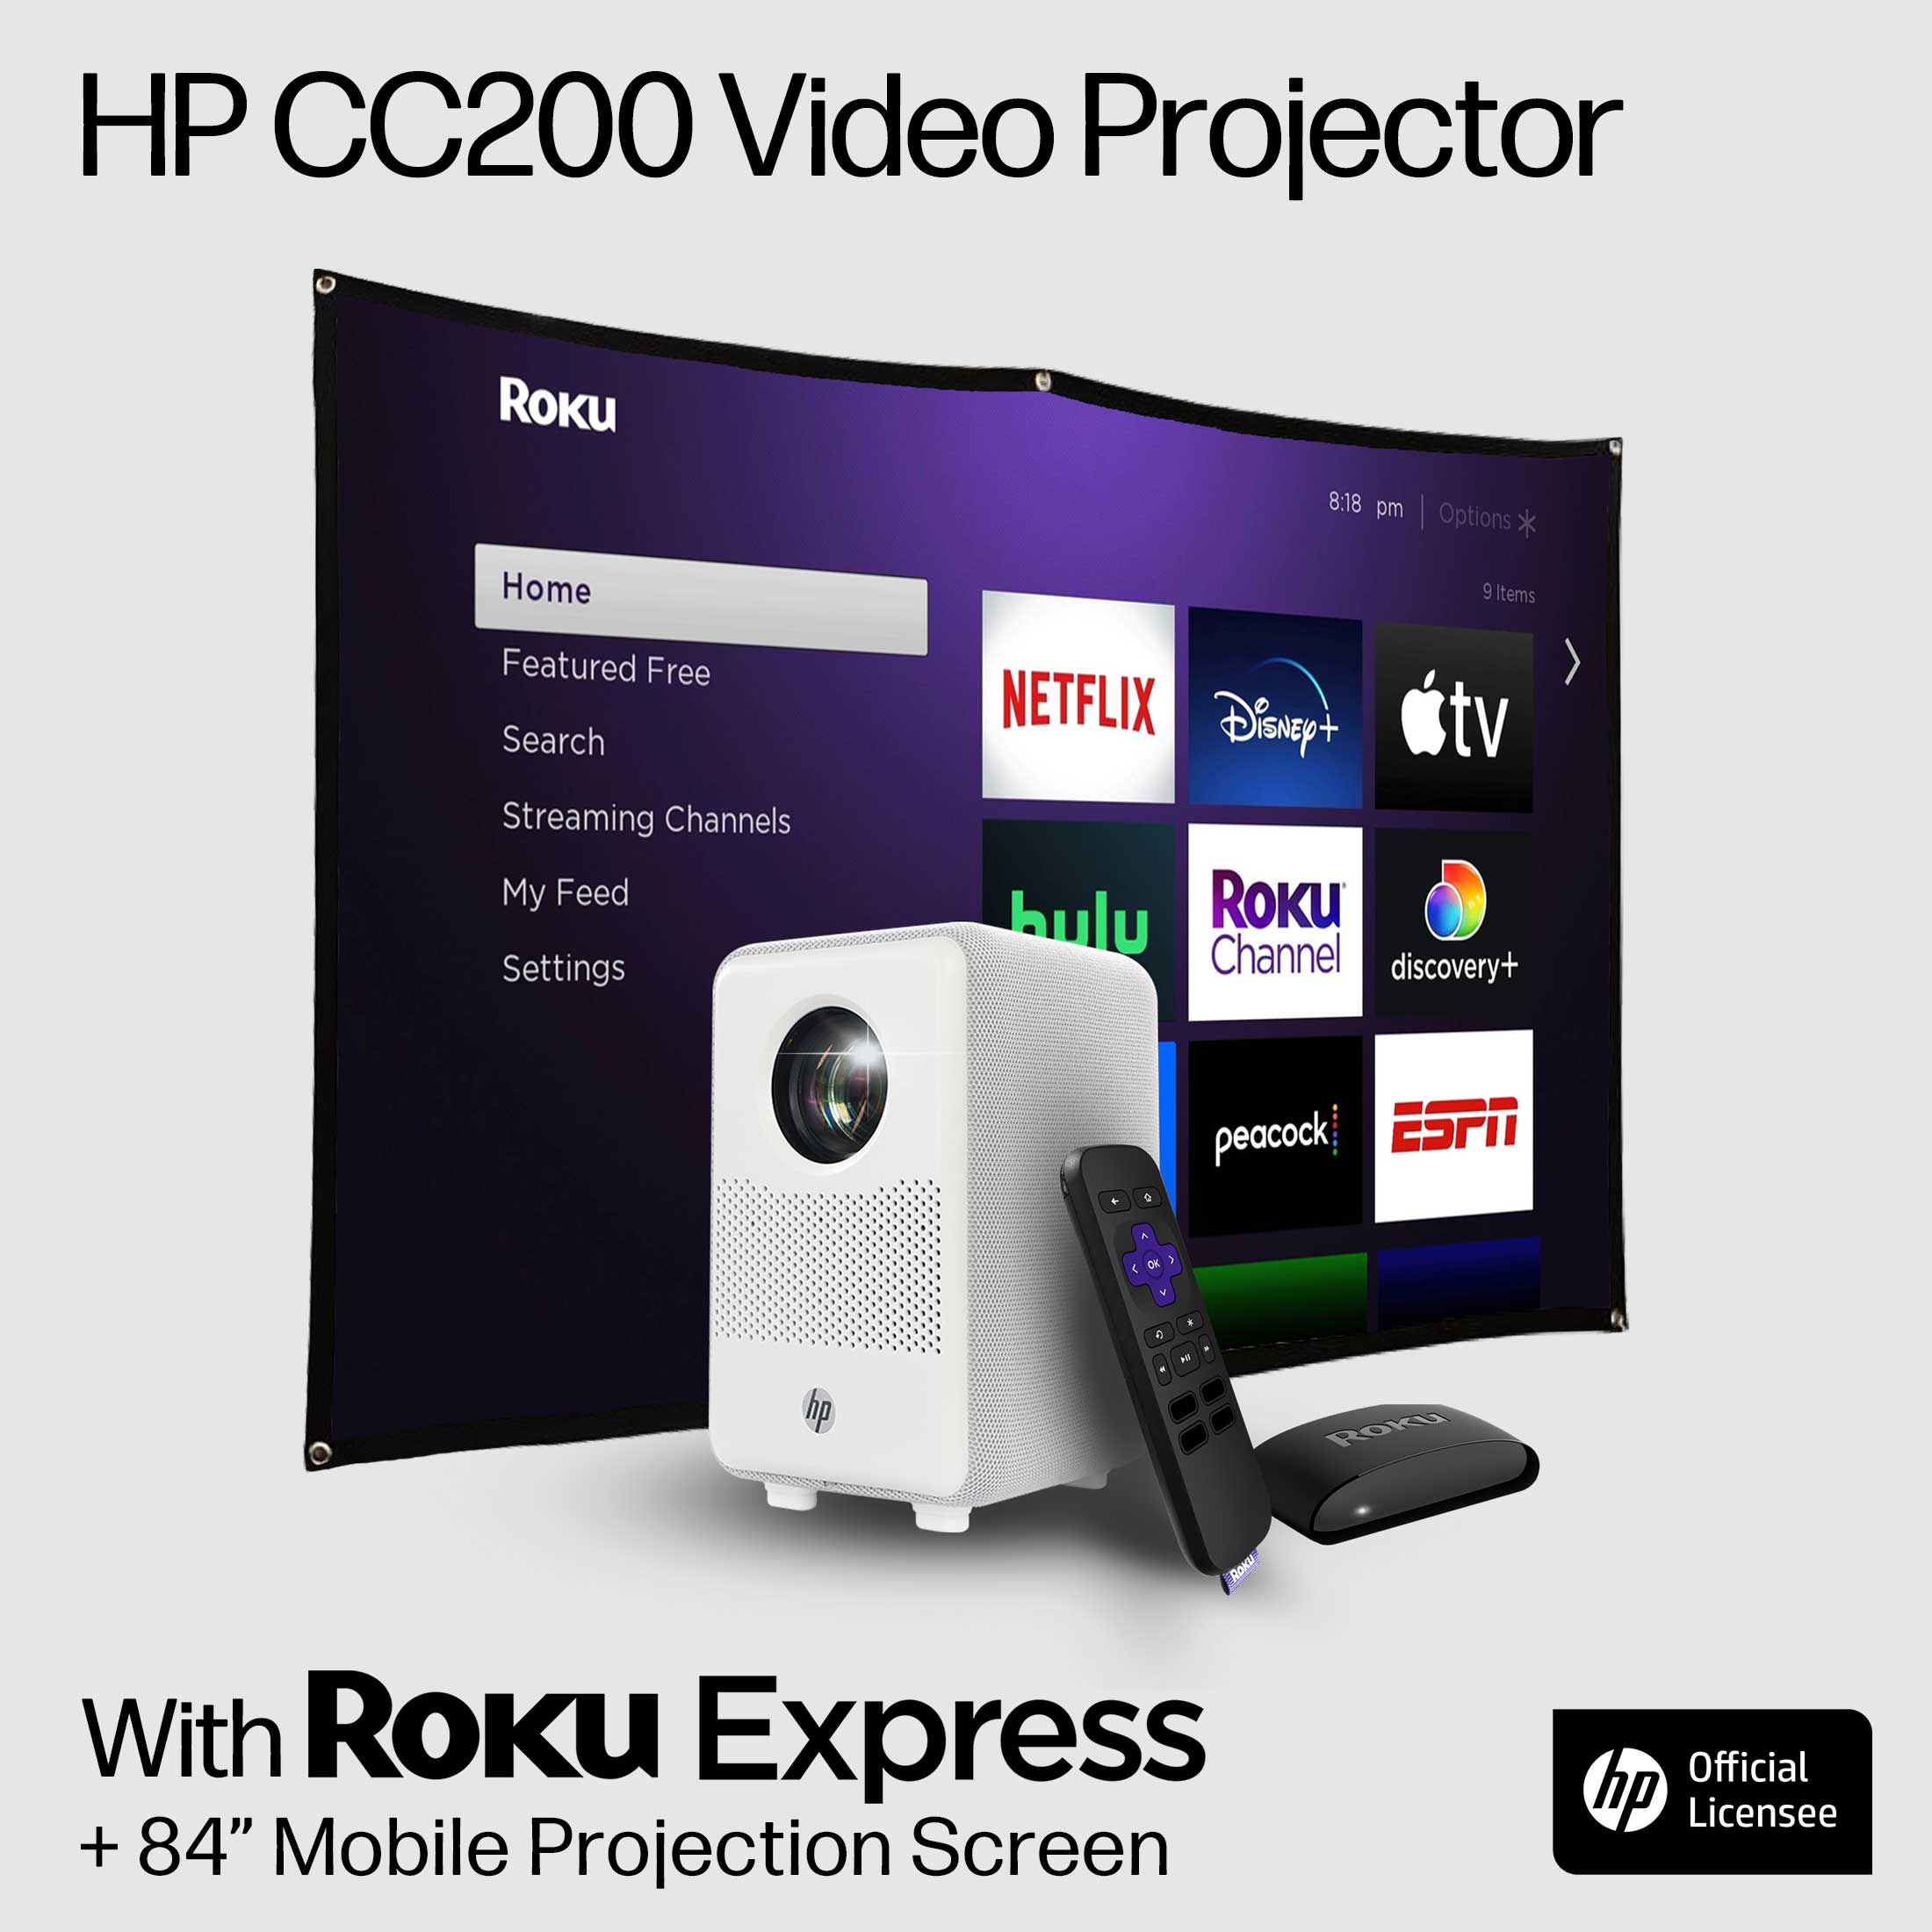 HP CC200 FHD LCD LED Projector with Roku Express Streaming Player and 84" Mobile Projection Screen - image 1 of 16